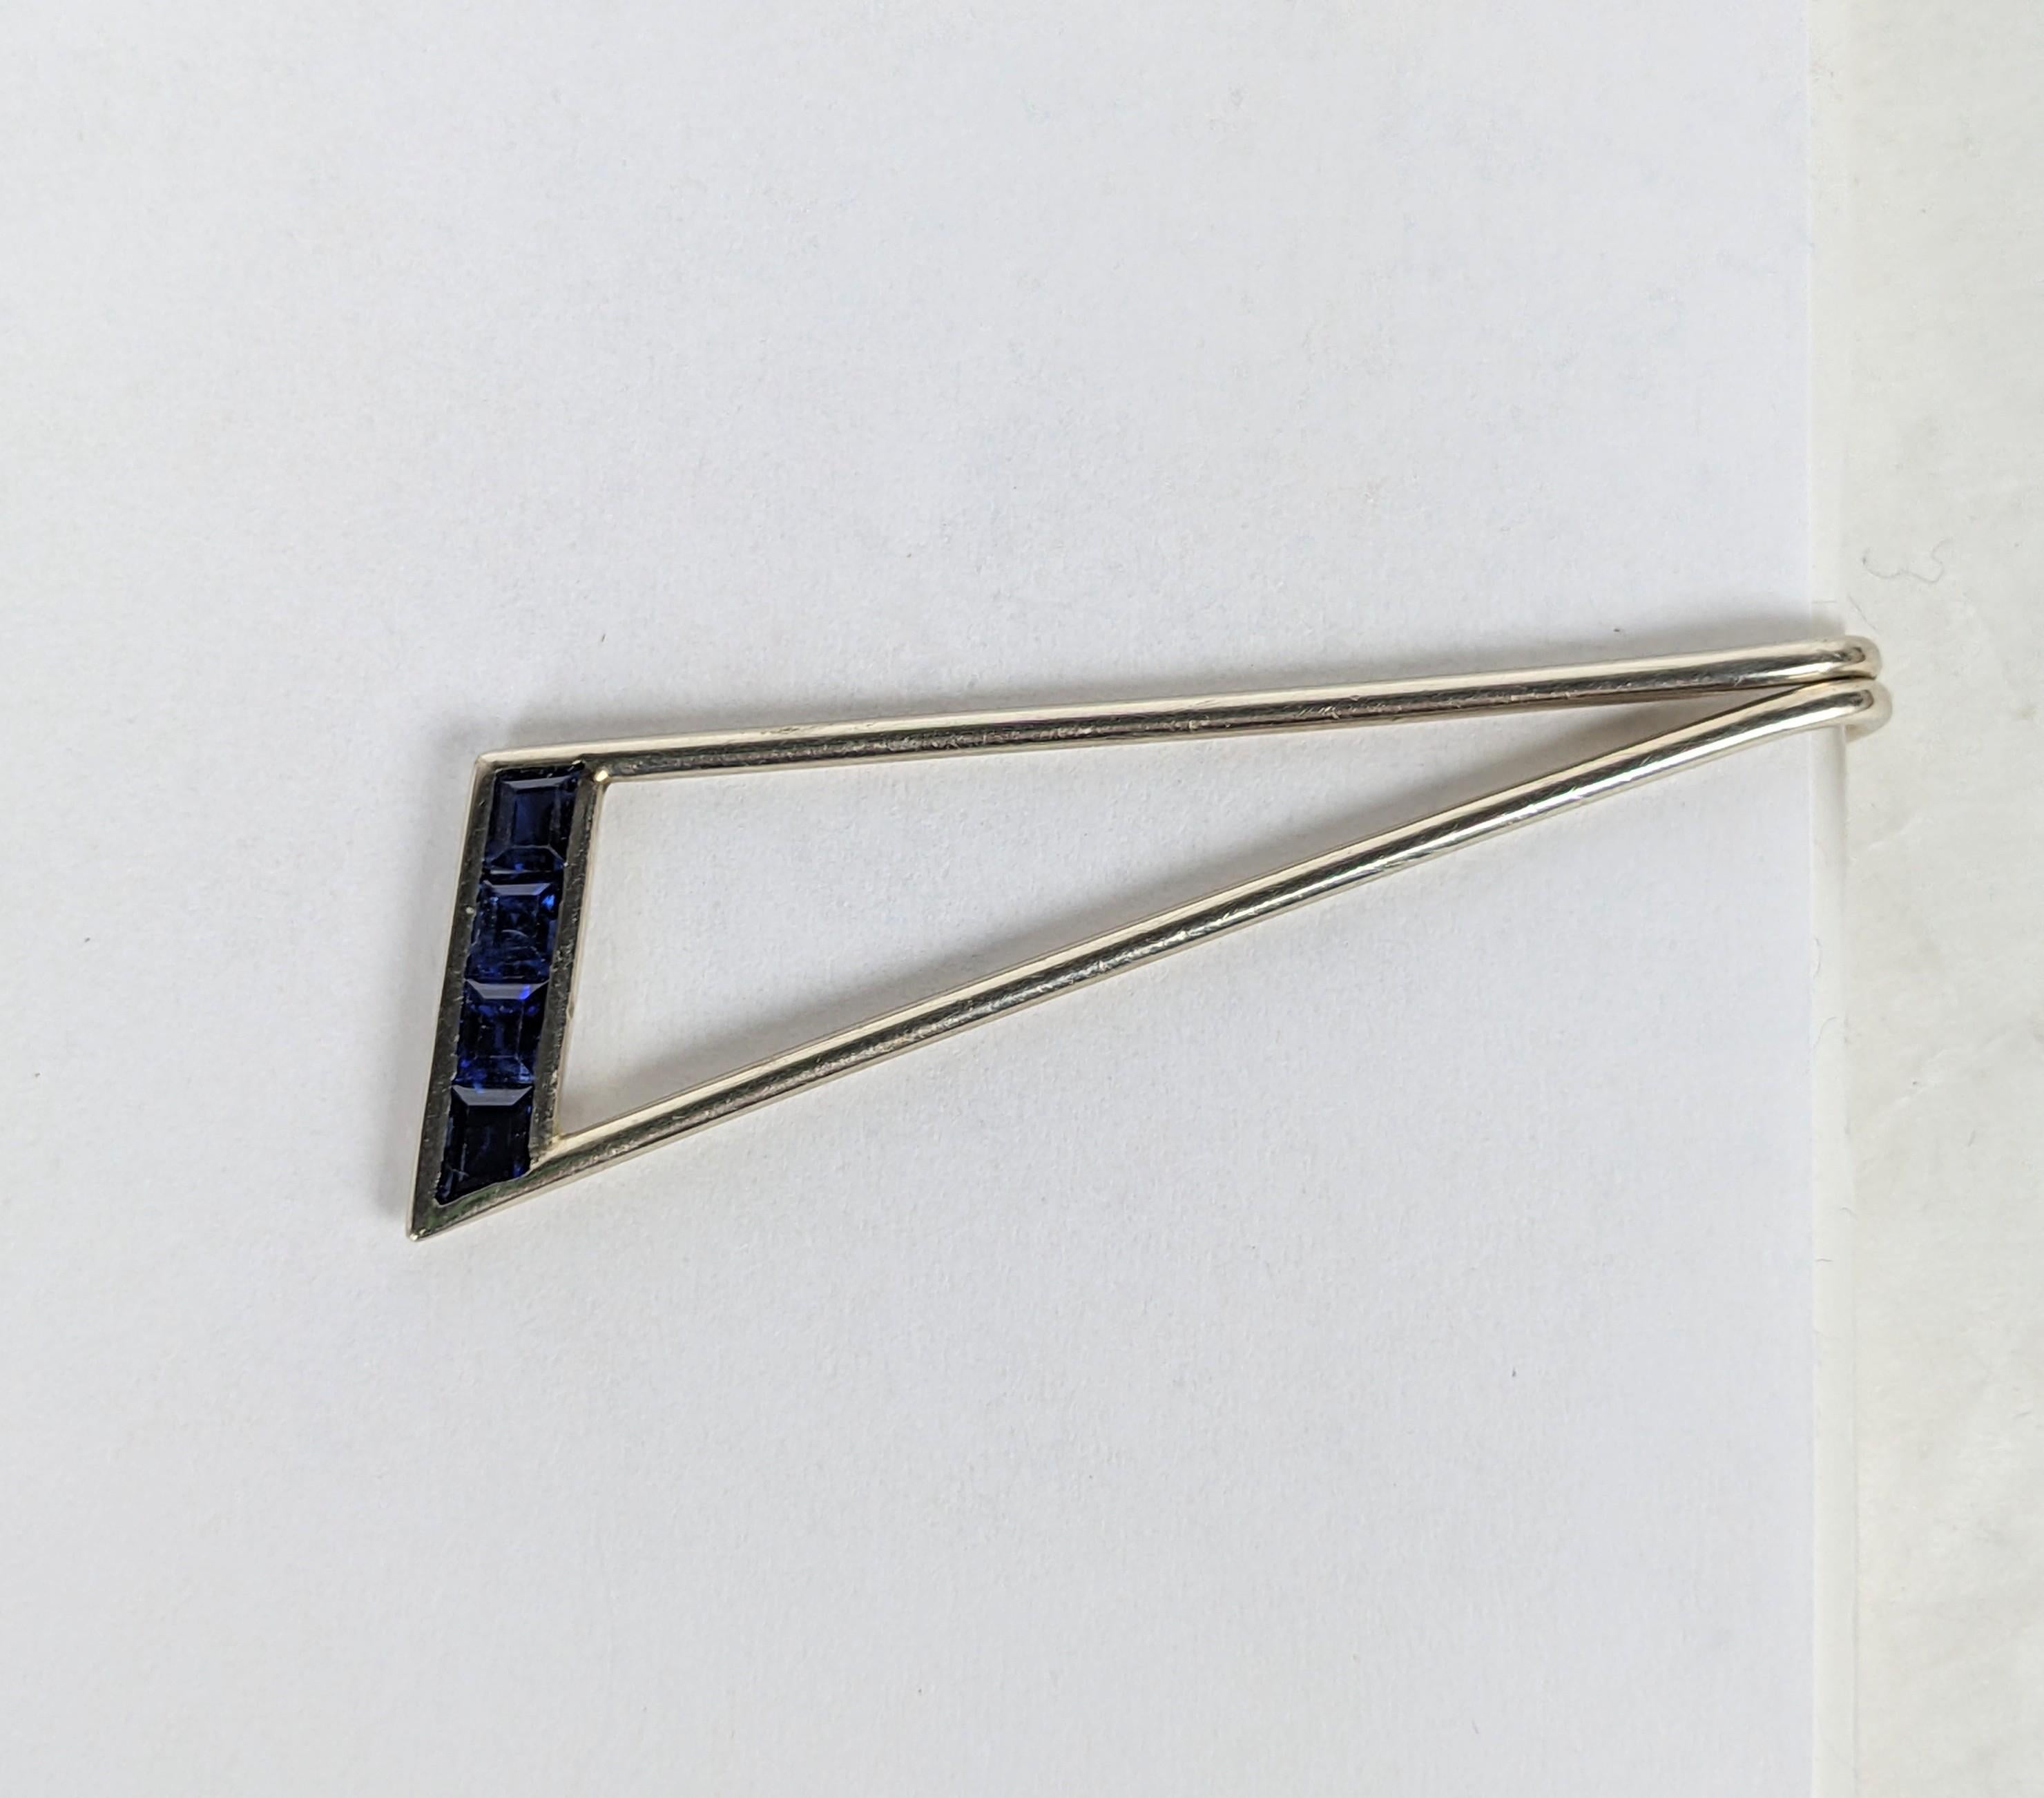 Art Deco Platinum and Sapphire Tie Bar from the 1930's. Simple elegant design of platinum wire with 4 calibre cut genuine matched sapphires. 1930's USA. 2